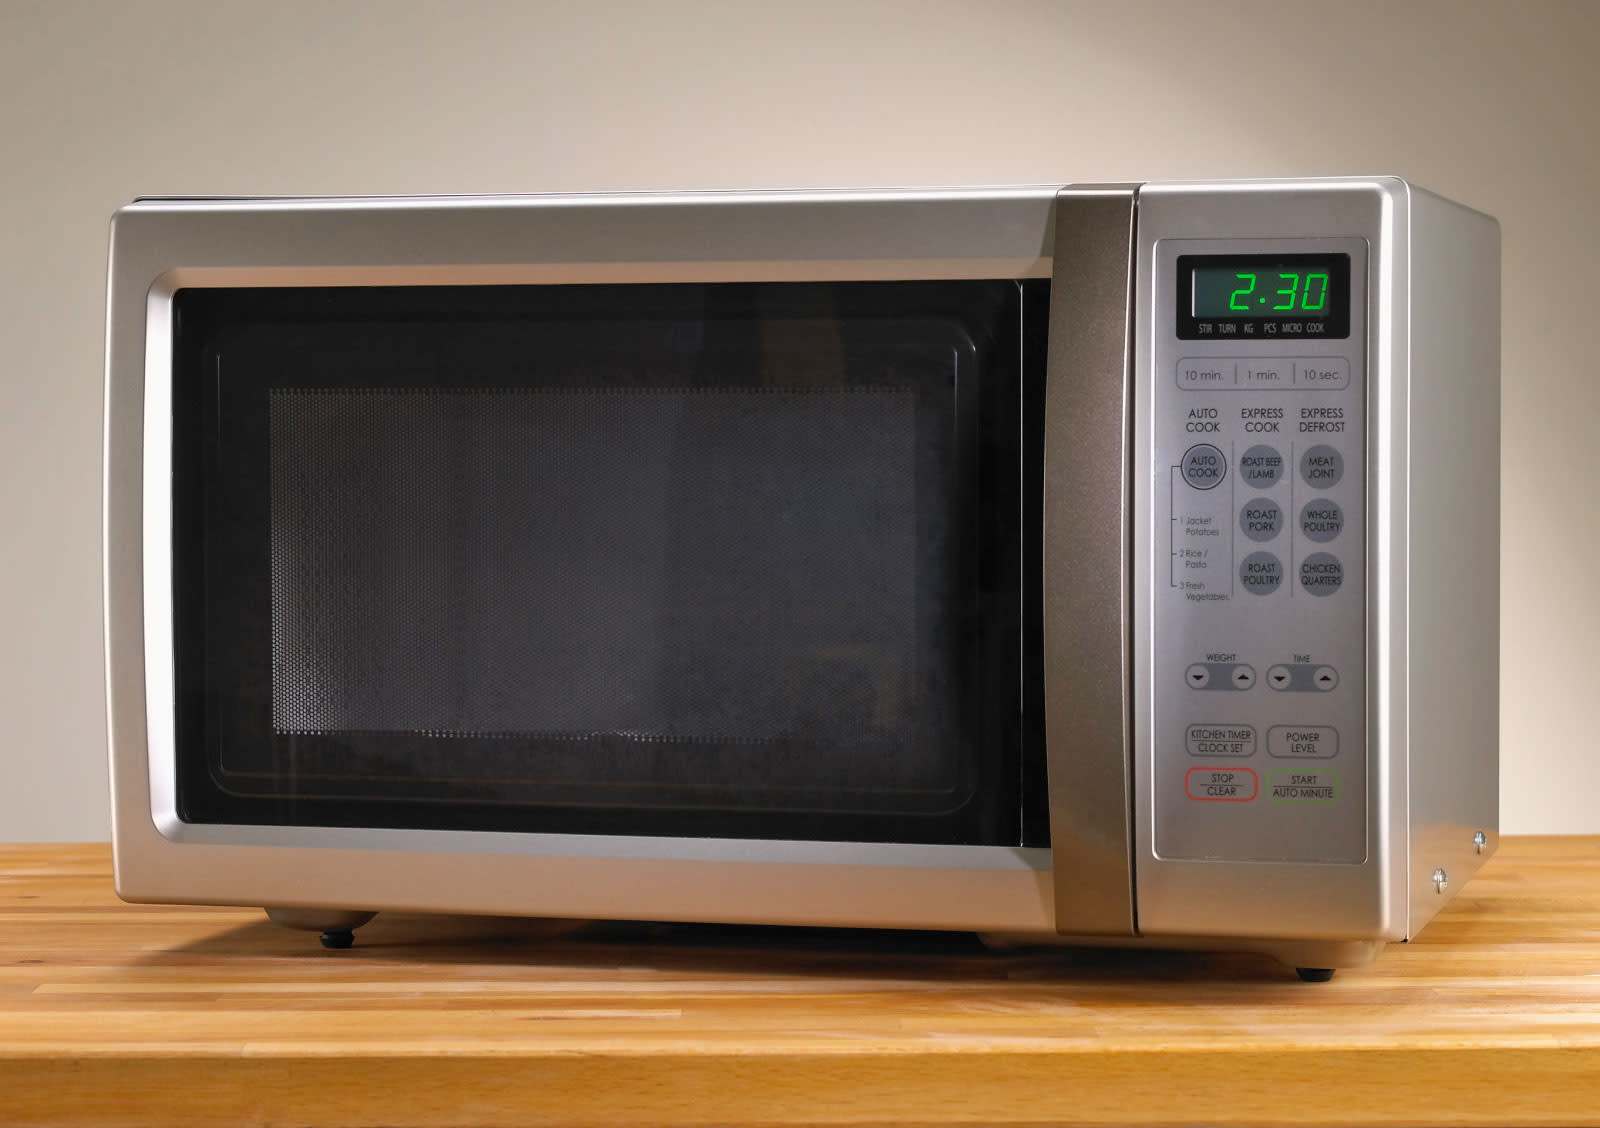 No, Kellyanne, microwaves cannot turn into cameras | Engadget